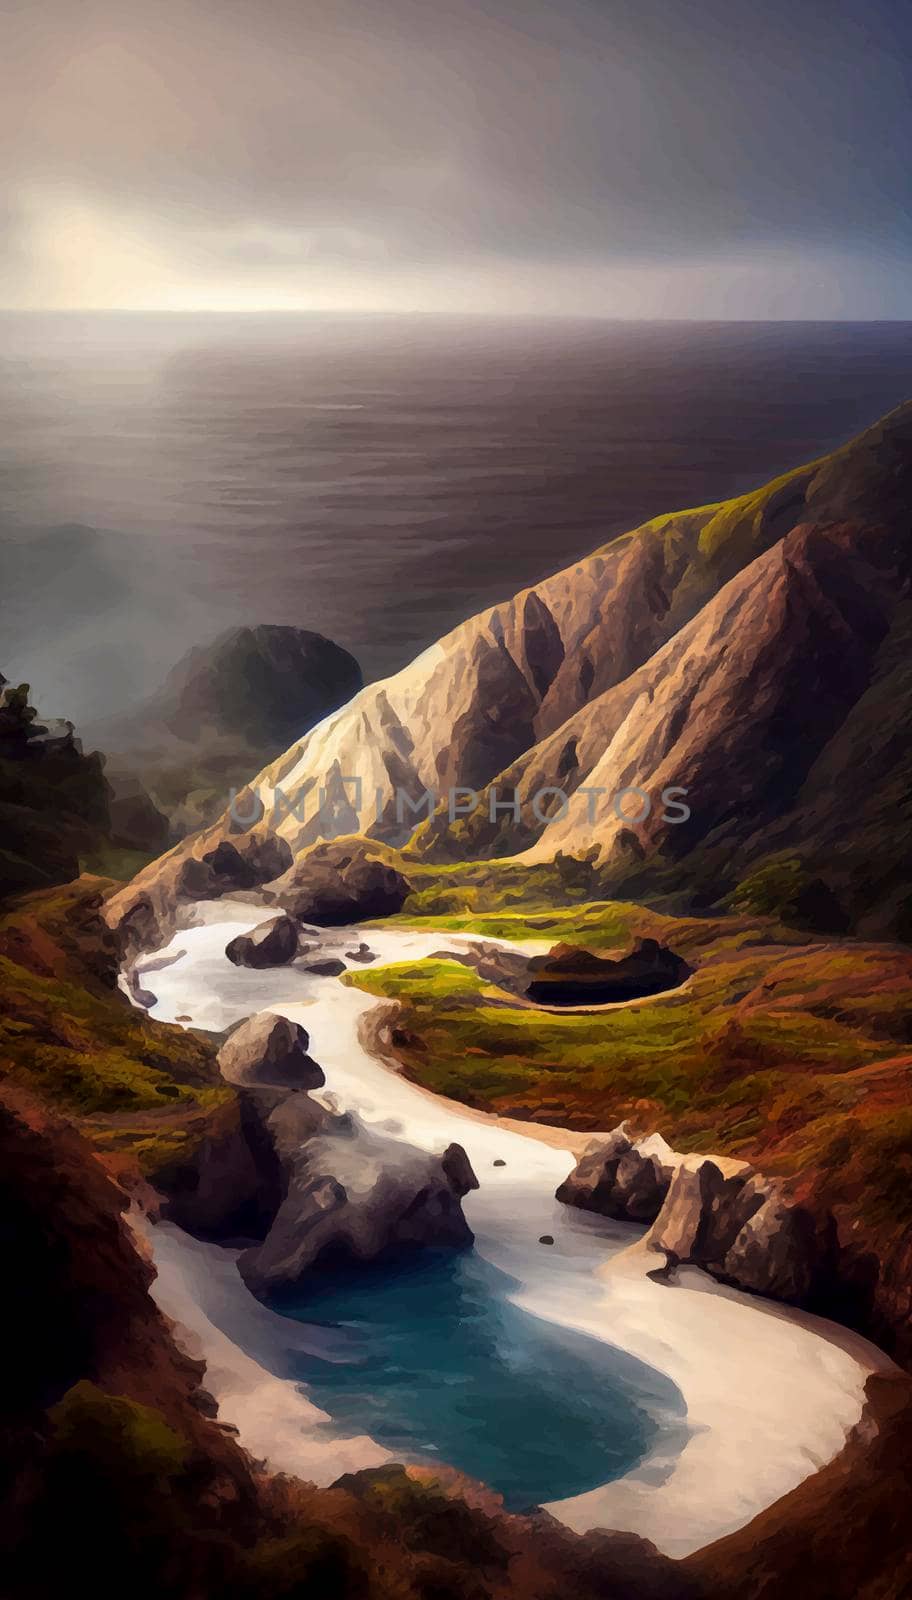 Illustration of peaceful landscape with a natural setting, cinematic and beautiful landscape illustration. by JpRamos